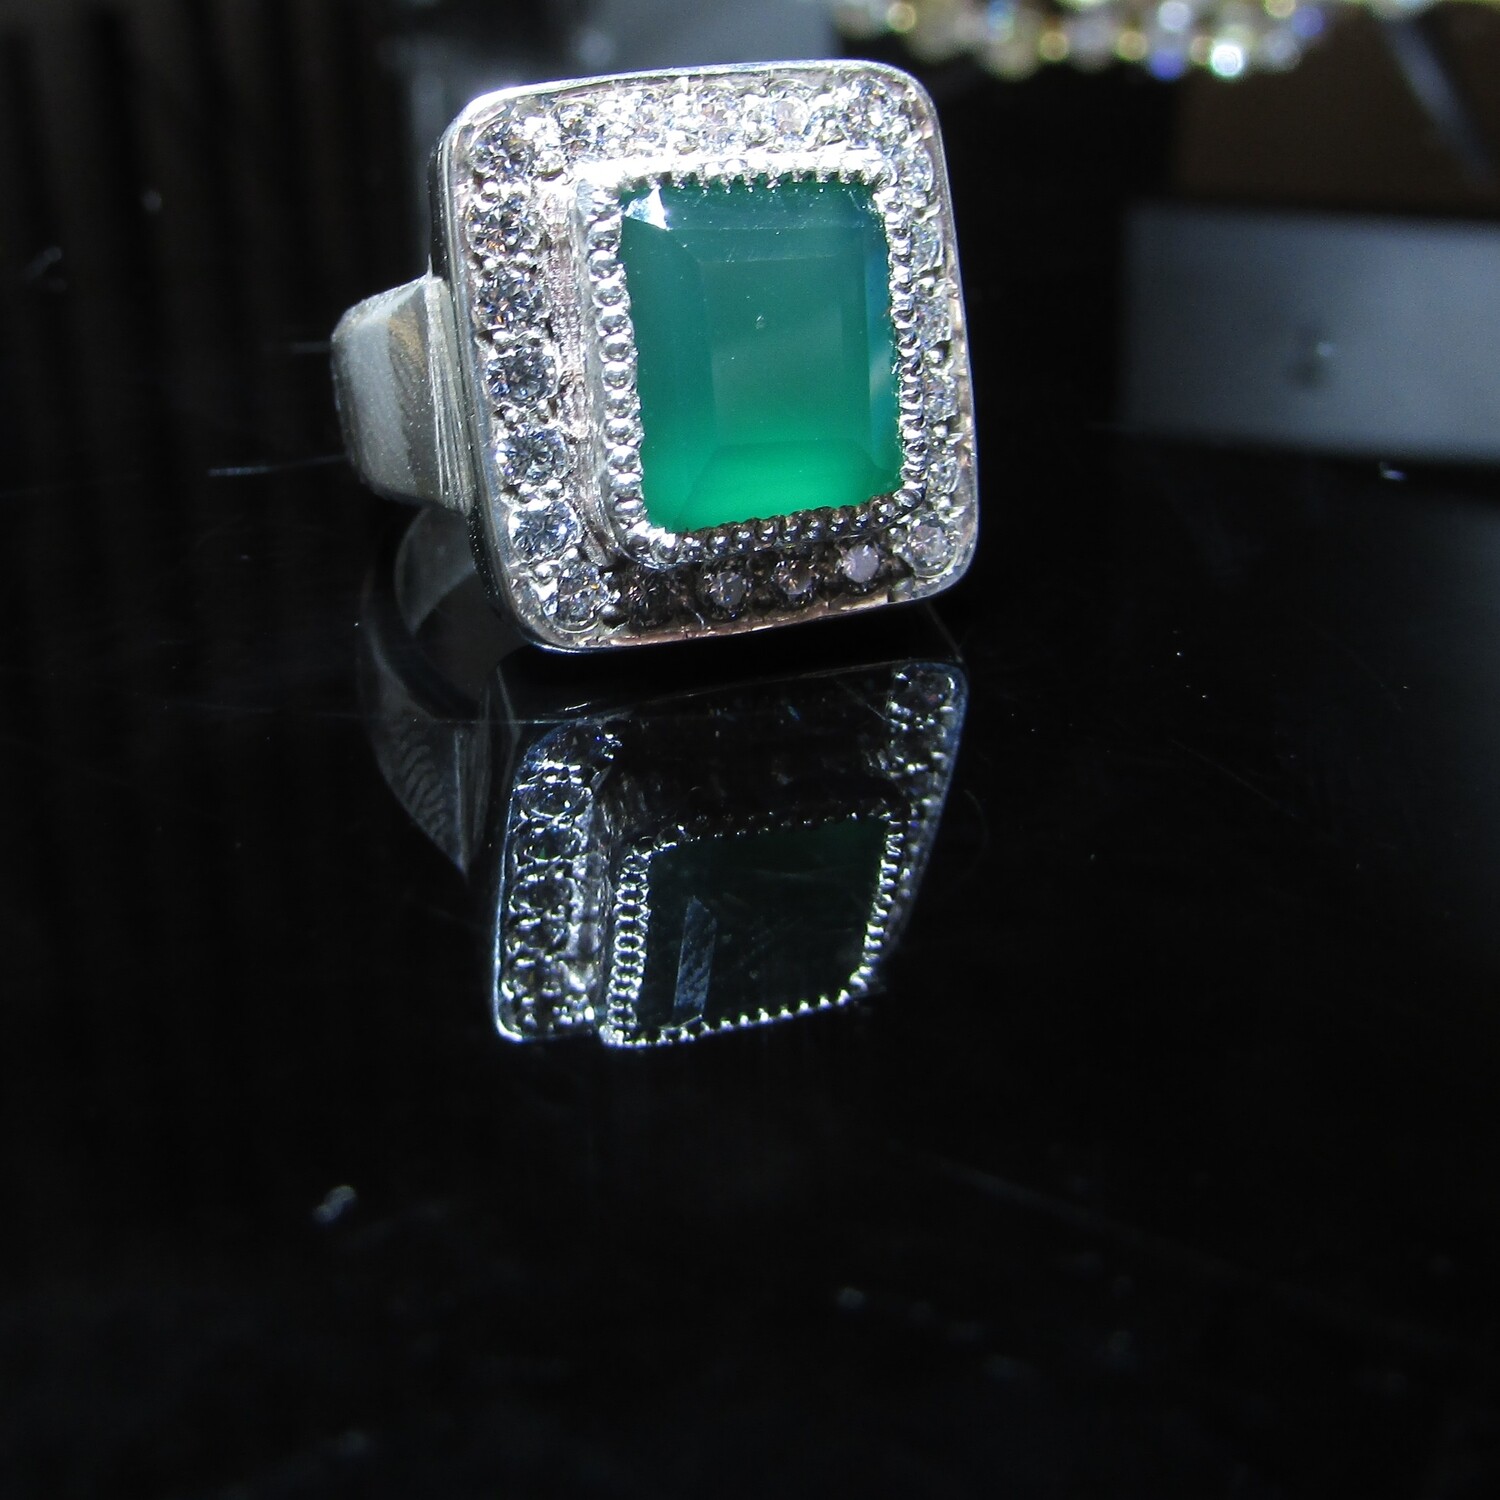 7ct Emerald Sterling Silver ring with 5ct CZ accents c. 1980's